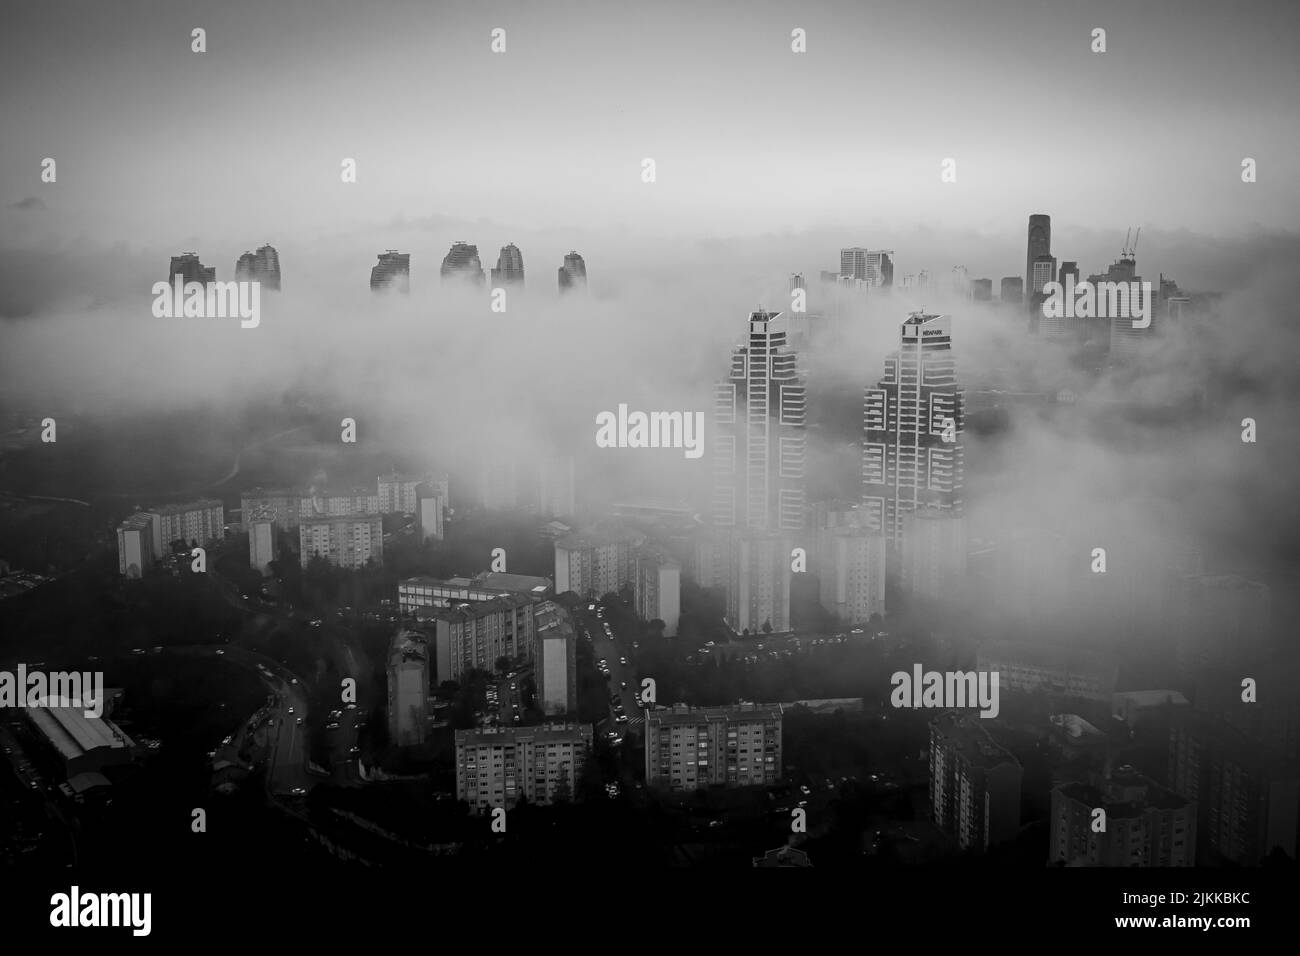 The aerial view of the buildings in Istanbul, Turkey under the fog Stock Photo